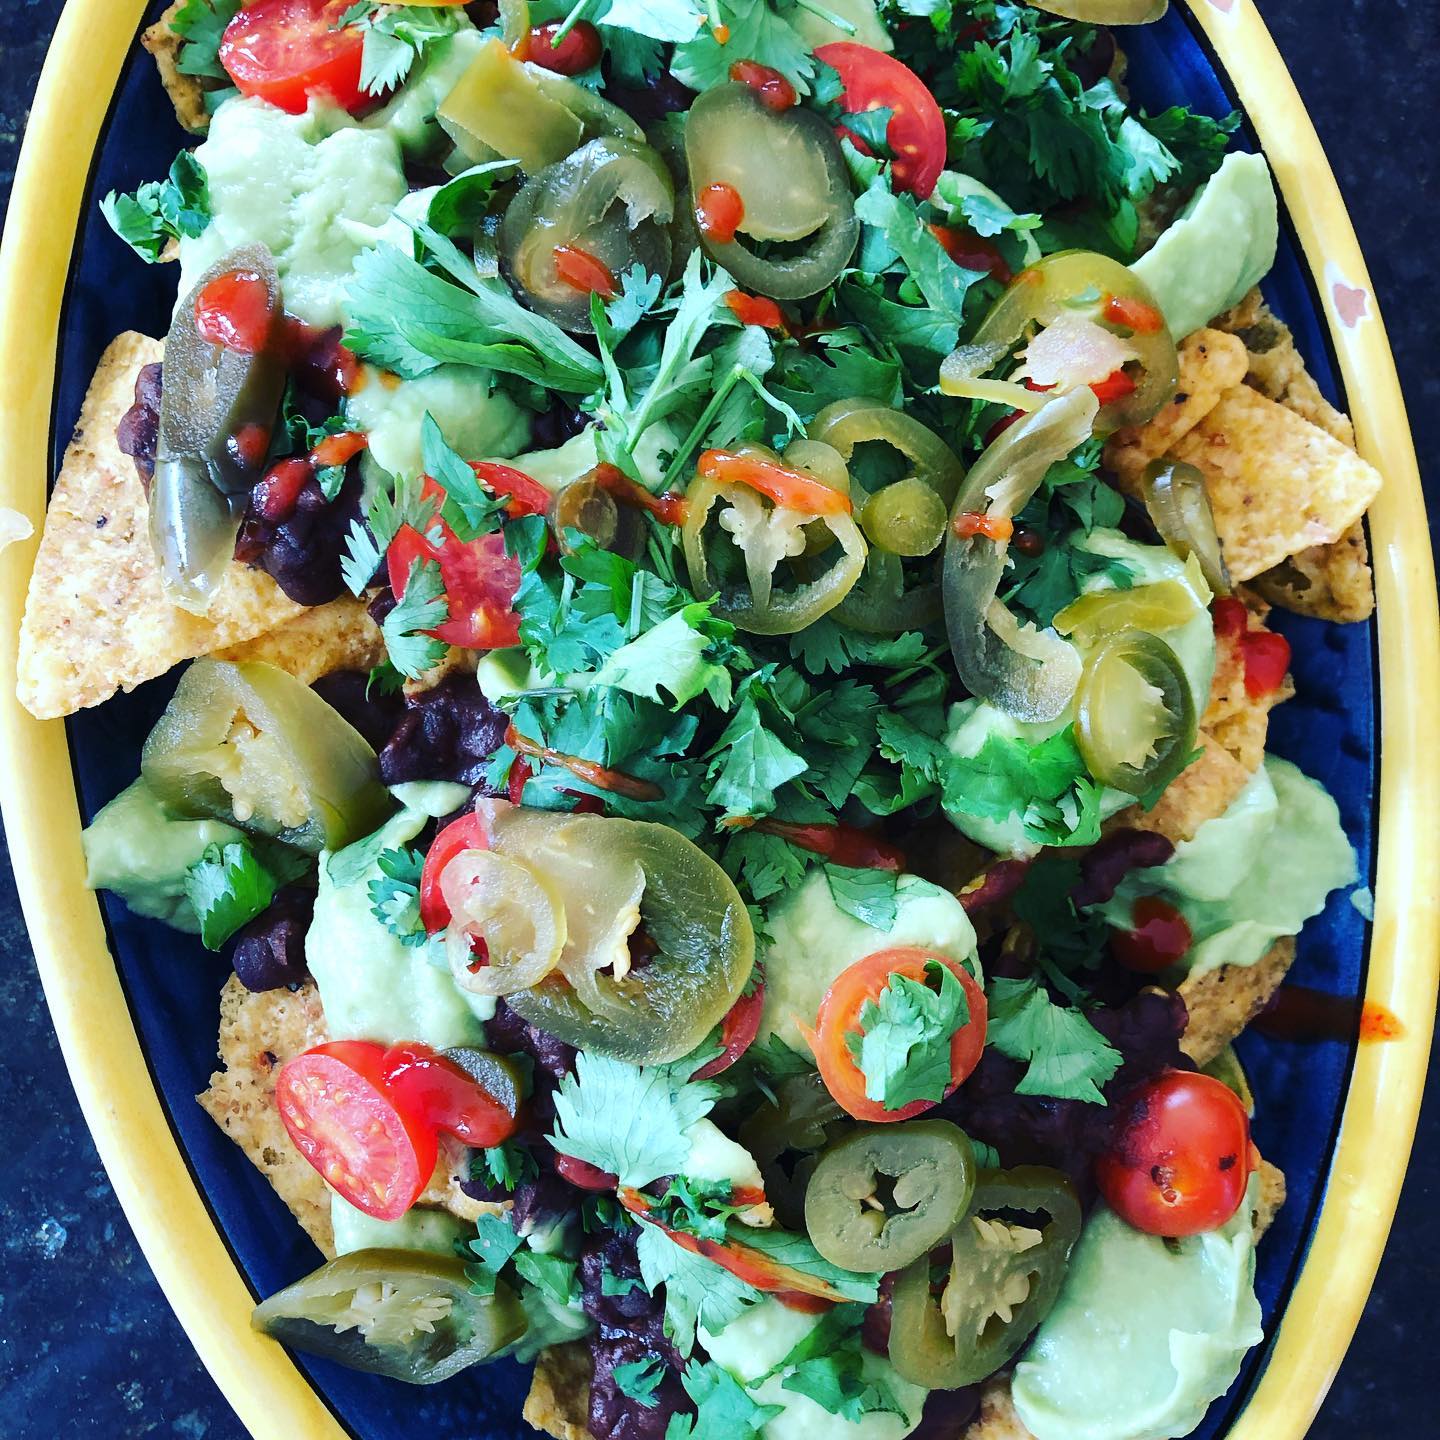 Fully Loaded Vegan Nachos with chilli beans, avocado dip, cherry tomatoes, coriander, chilli sauce and jalapeños #vegan #vegetarian #nutritionistapproved #nutrition #nutritionist #organic #glutenfree #dairyfree #sugarfree #healthytreats #yogiclife #yogicfood